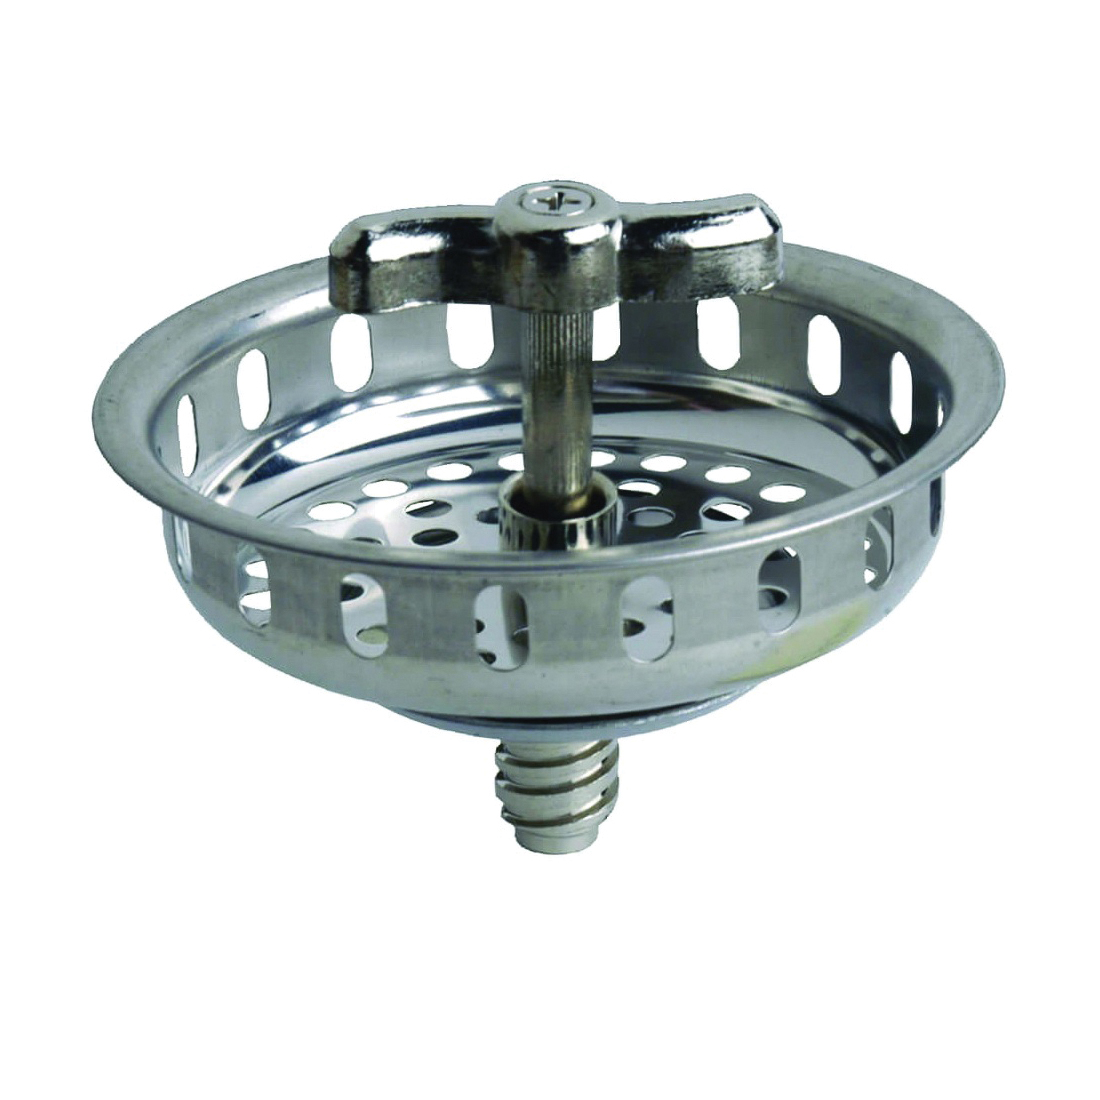 86800 Basket Strainer, 3-1/2 in Dia, Stainless Steel, Chrome, For: Universal Spin-N-Grin Strainer